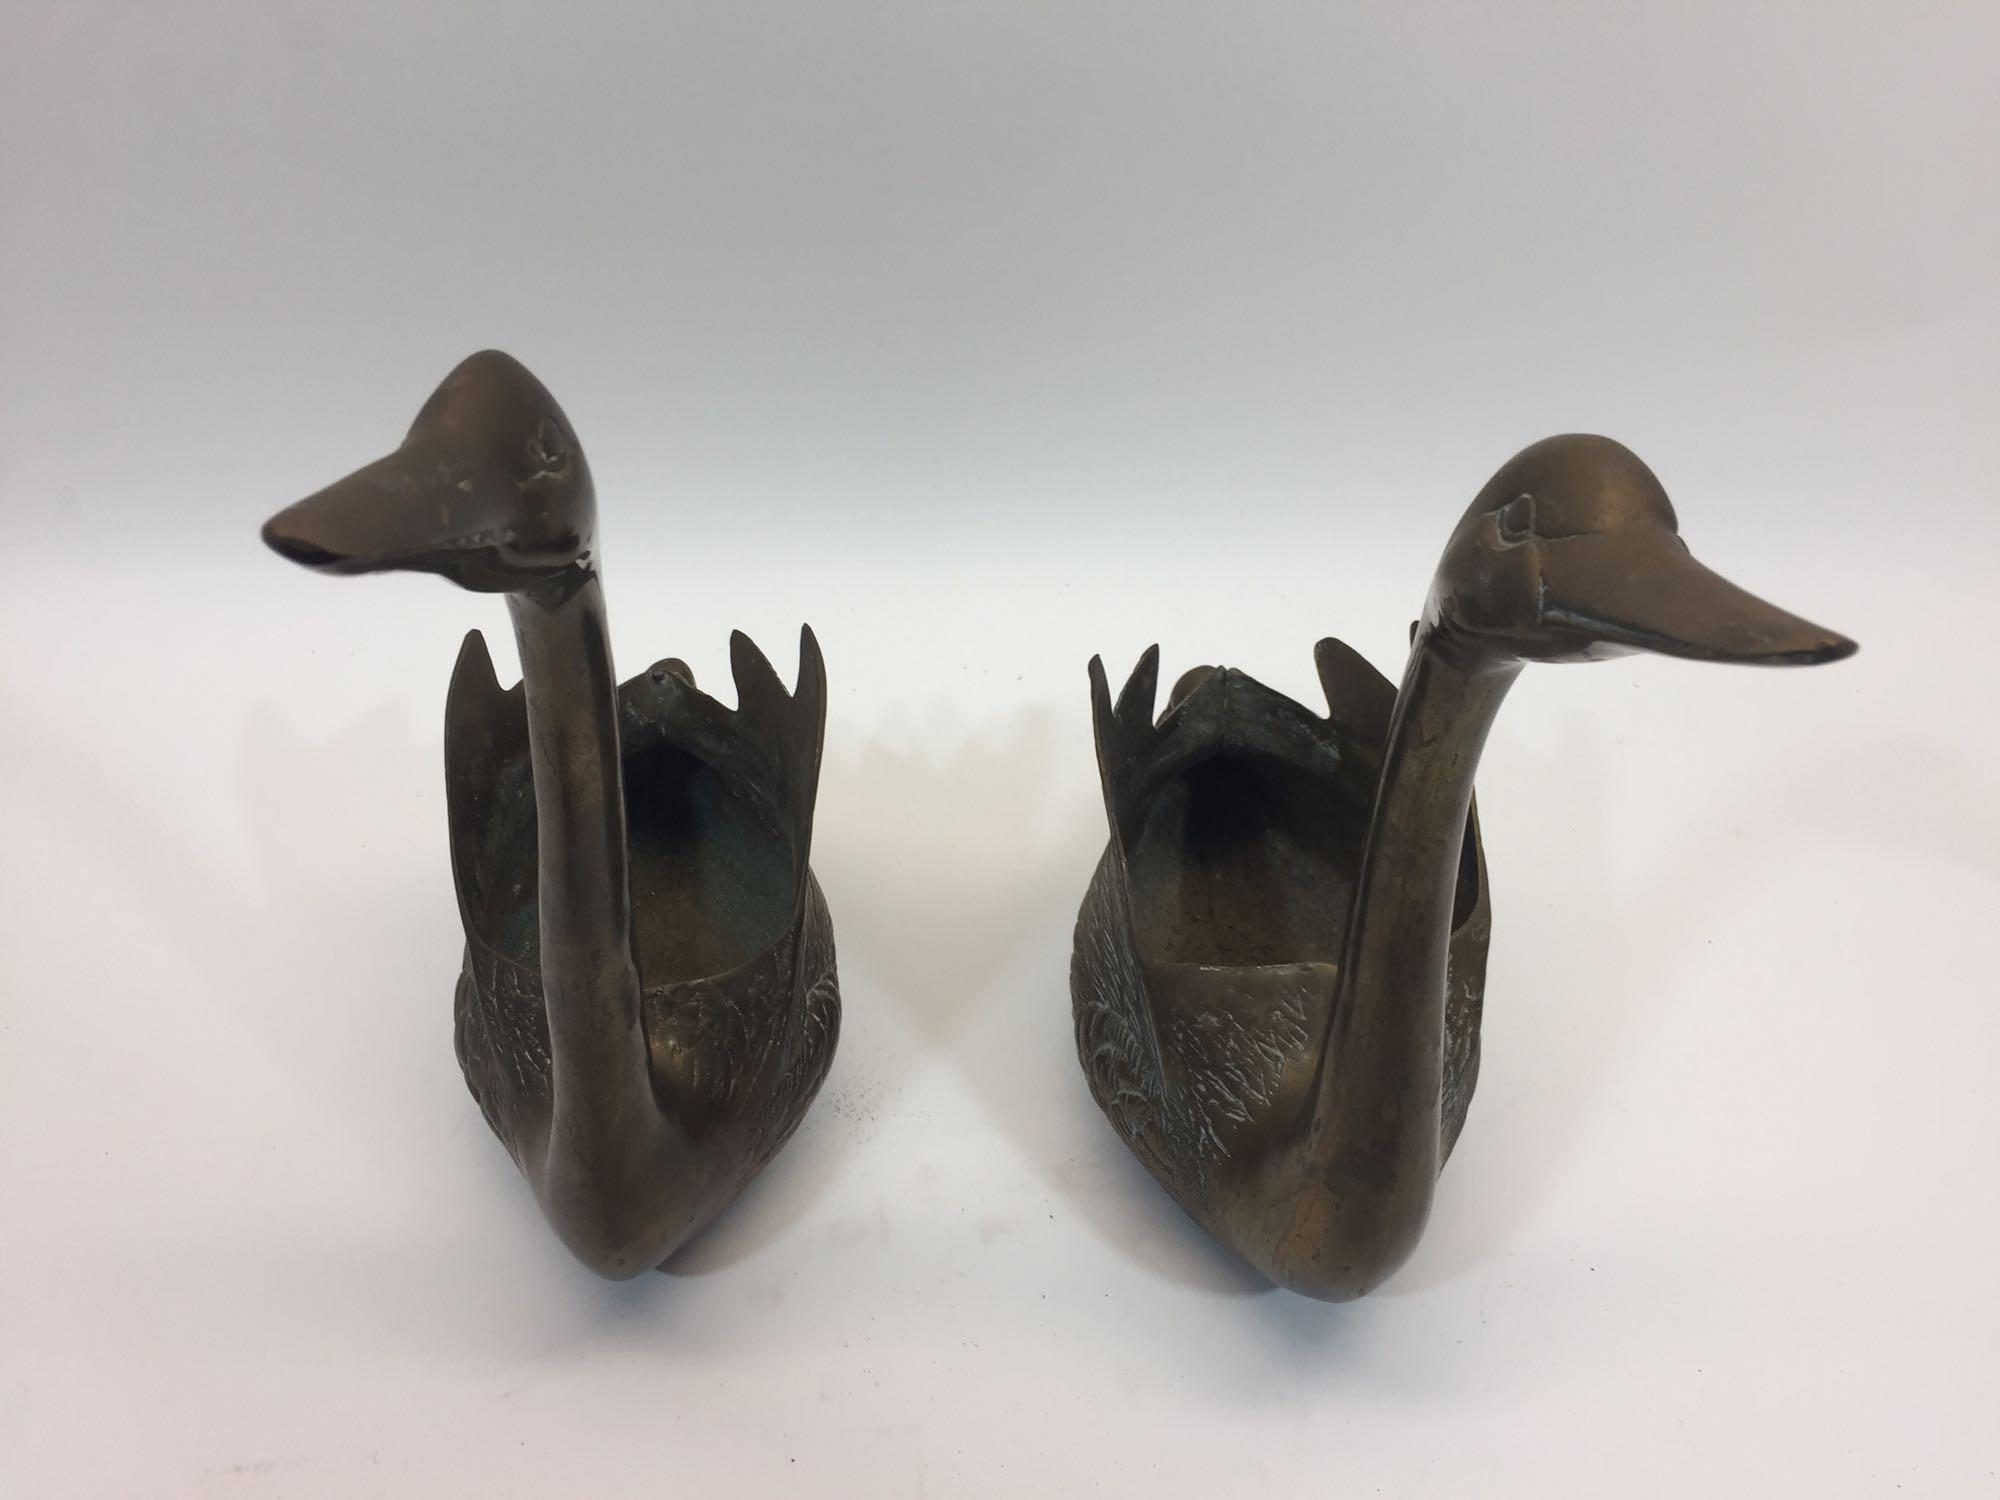 2 Metal Swans -14in Tall